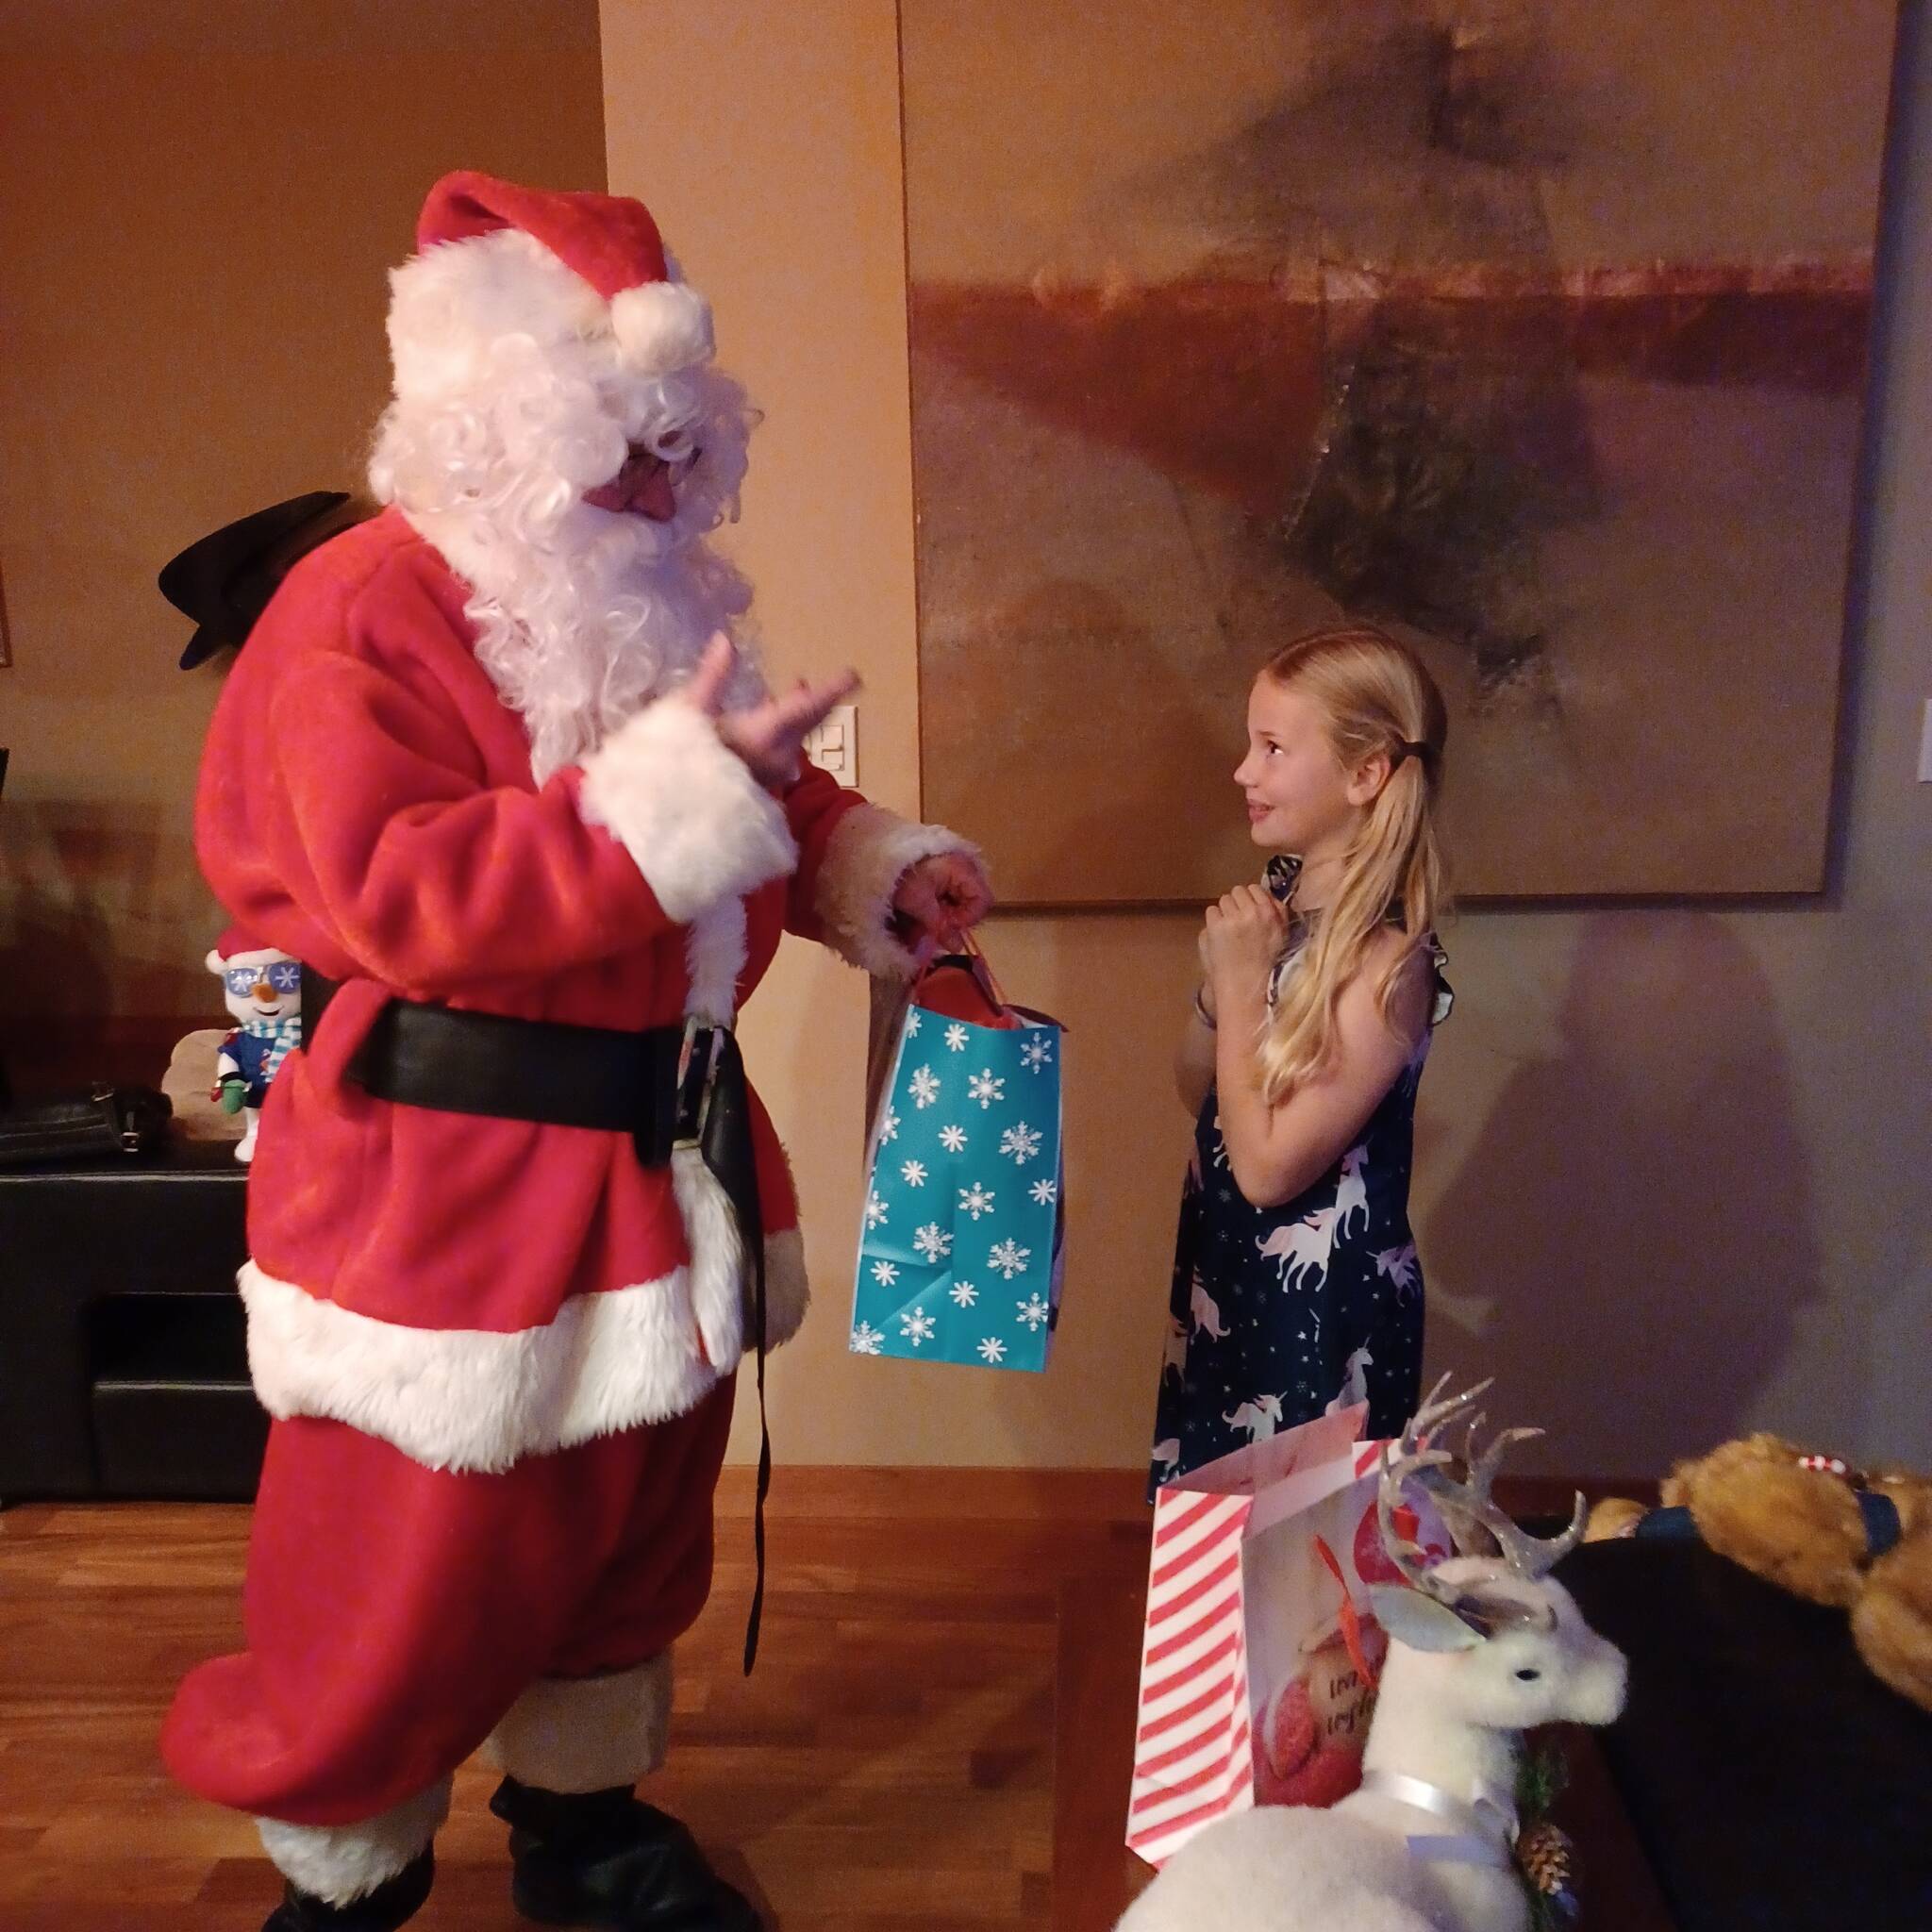 Photo provided
Mark Stewart Cassidy as Santa Claus delivers a gift to a young girl during a recent house call.